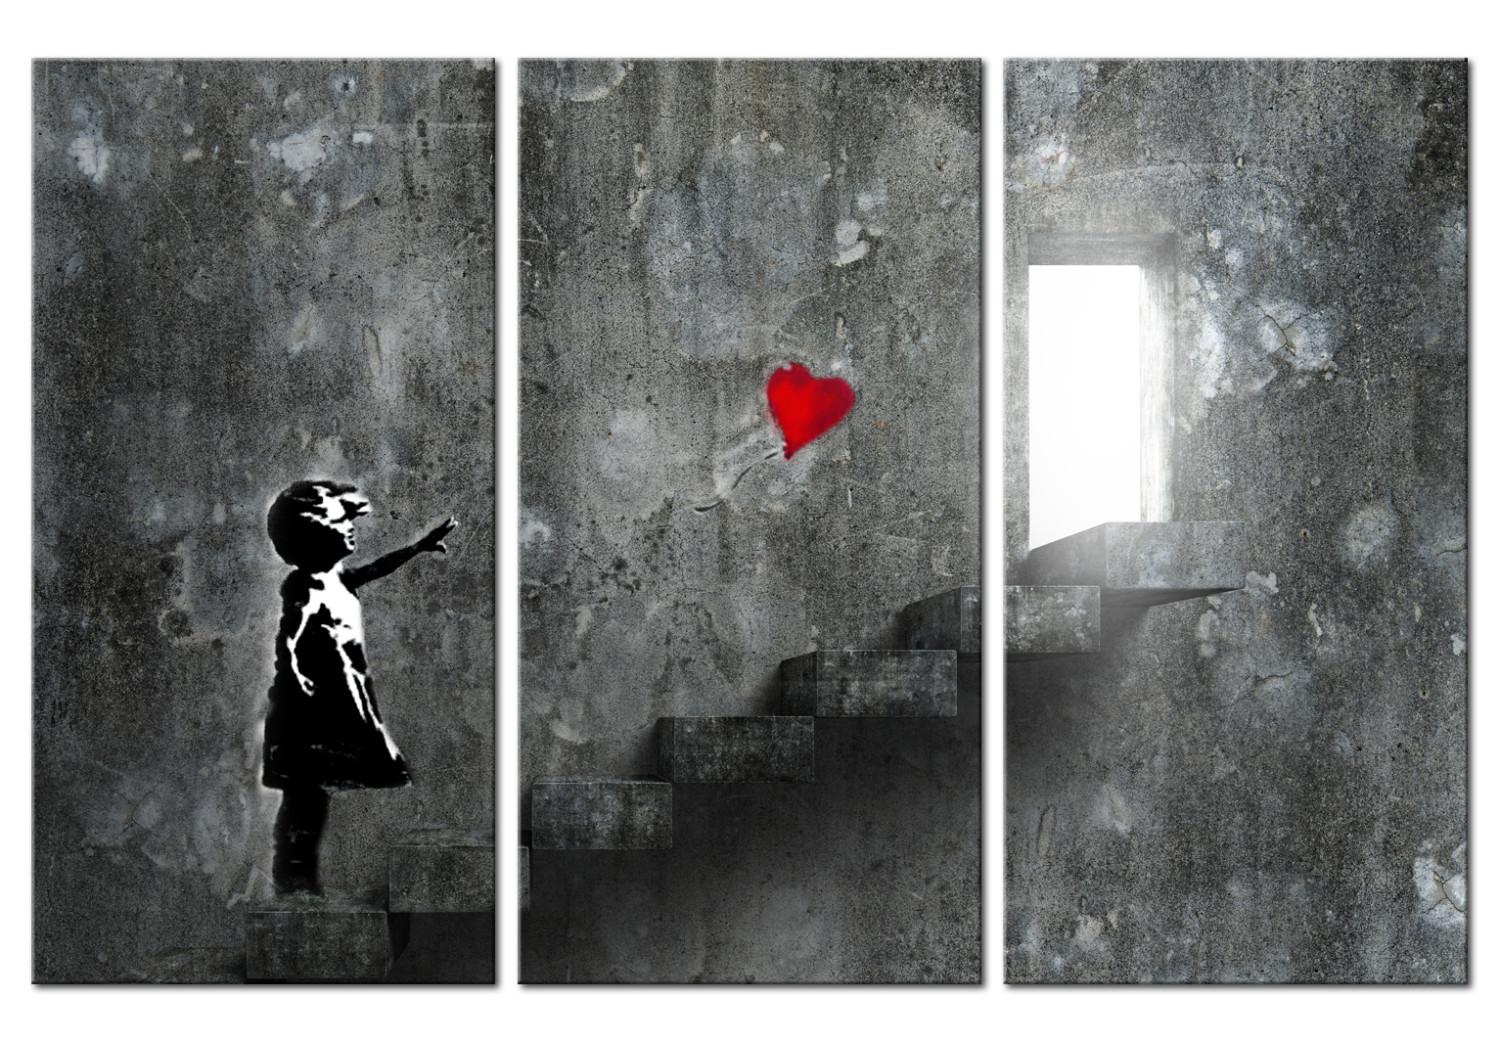 Canvas Banksy: Girl with Balloon - Urban Graffiti with Heart and Stairs